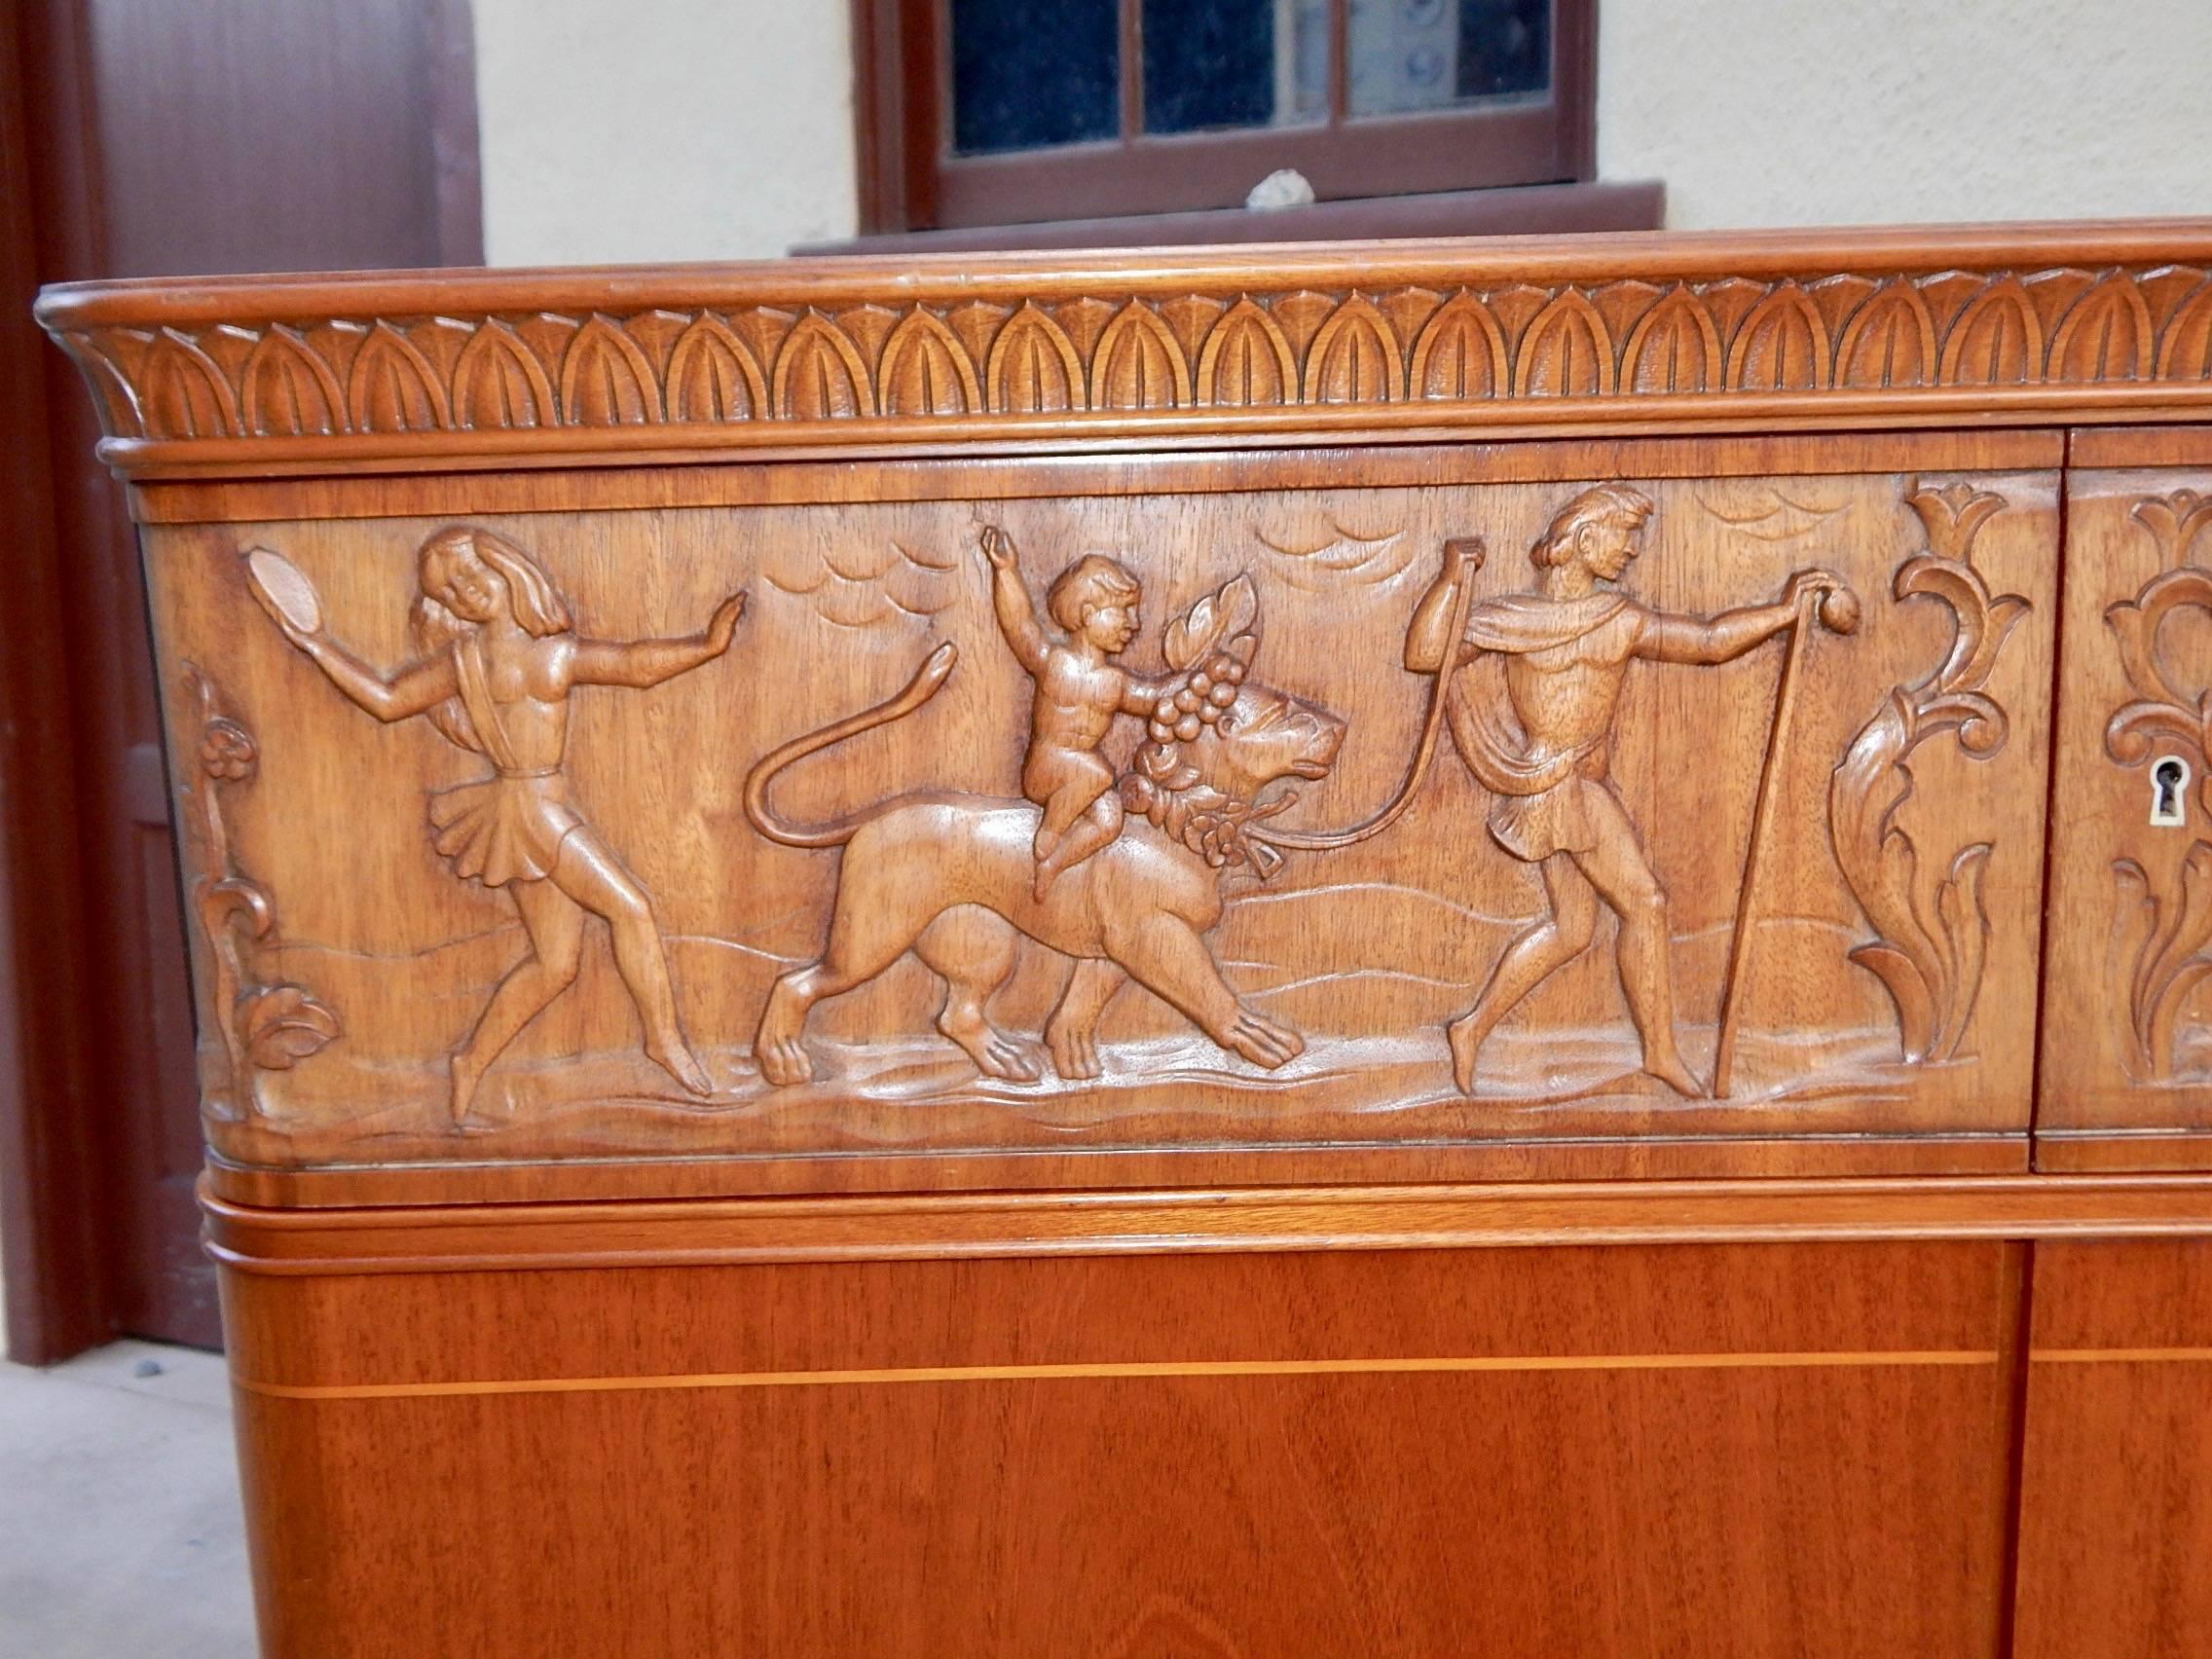 Swedish, 1940s Moderne Storage Cabinet with Figural Relief by Eugene Höglund For Sale 4